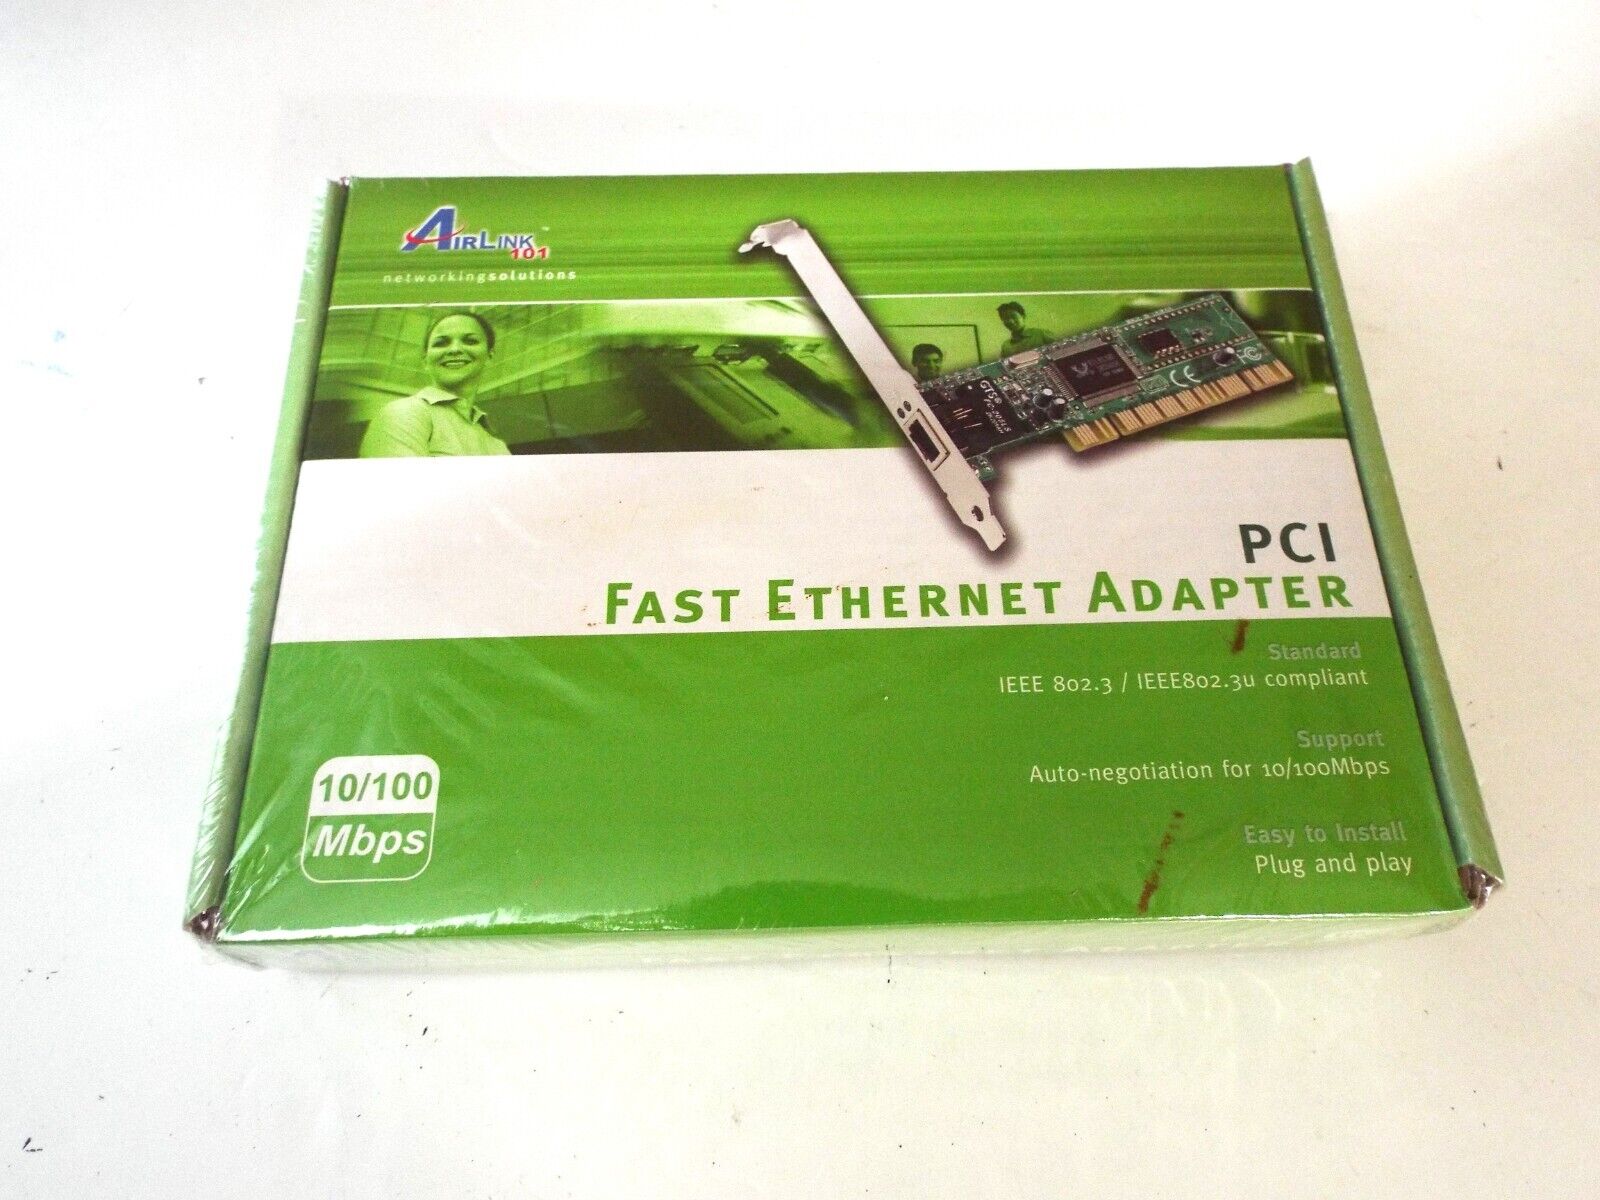 AirLink 101 PCI Fast Ethernet Adapter New Sealed 10/100 Mbps